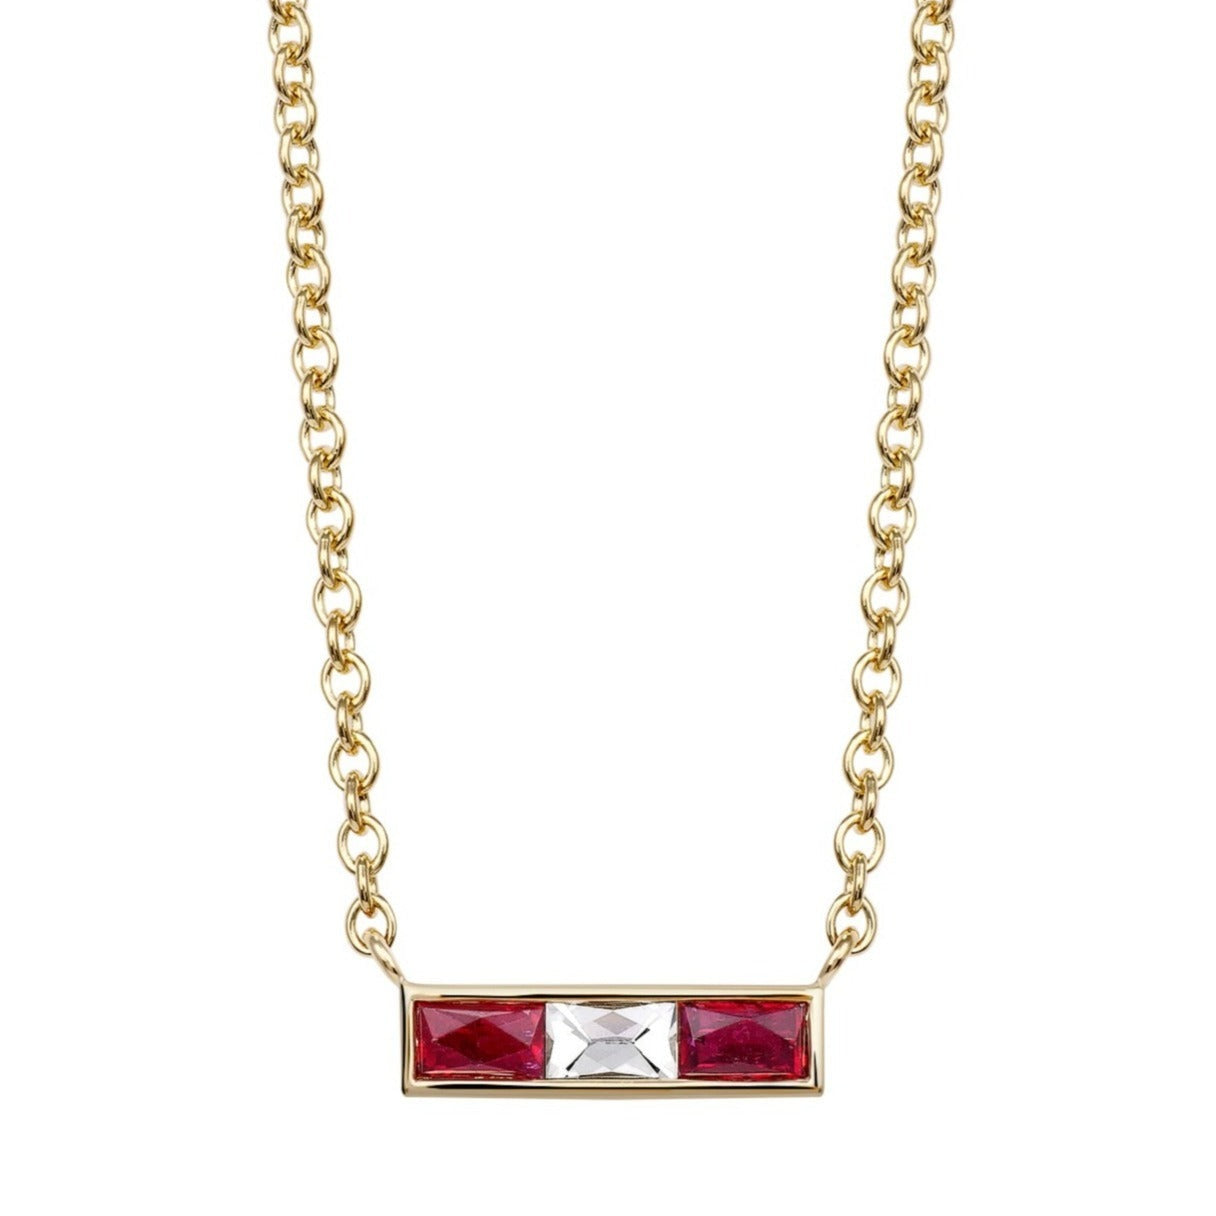 SINGLE STONE MONET NECKLACE WITH DIAMONDS AND GEMSTONES featuring Approximately 0.15ct French cut diamonds set between approximately 0.30ctw French cut gemstones bezel set on a handcrafted 18K yellow gold necklace. Necklace measures 17".